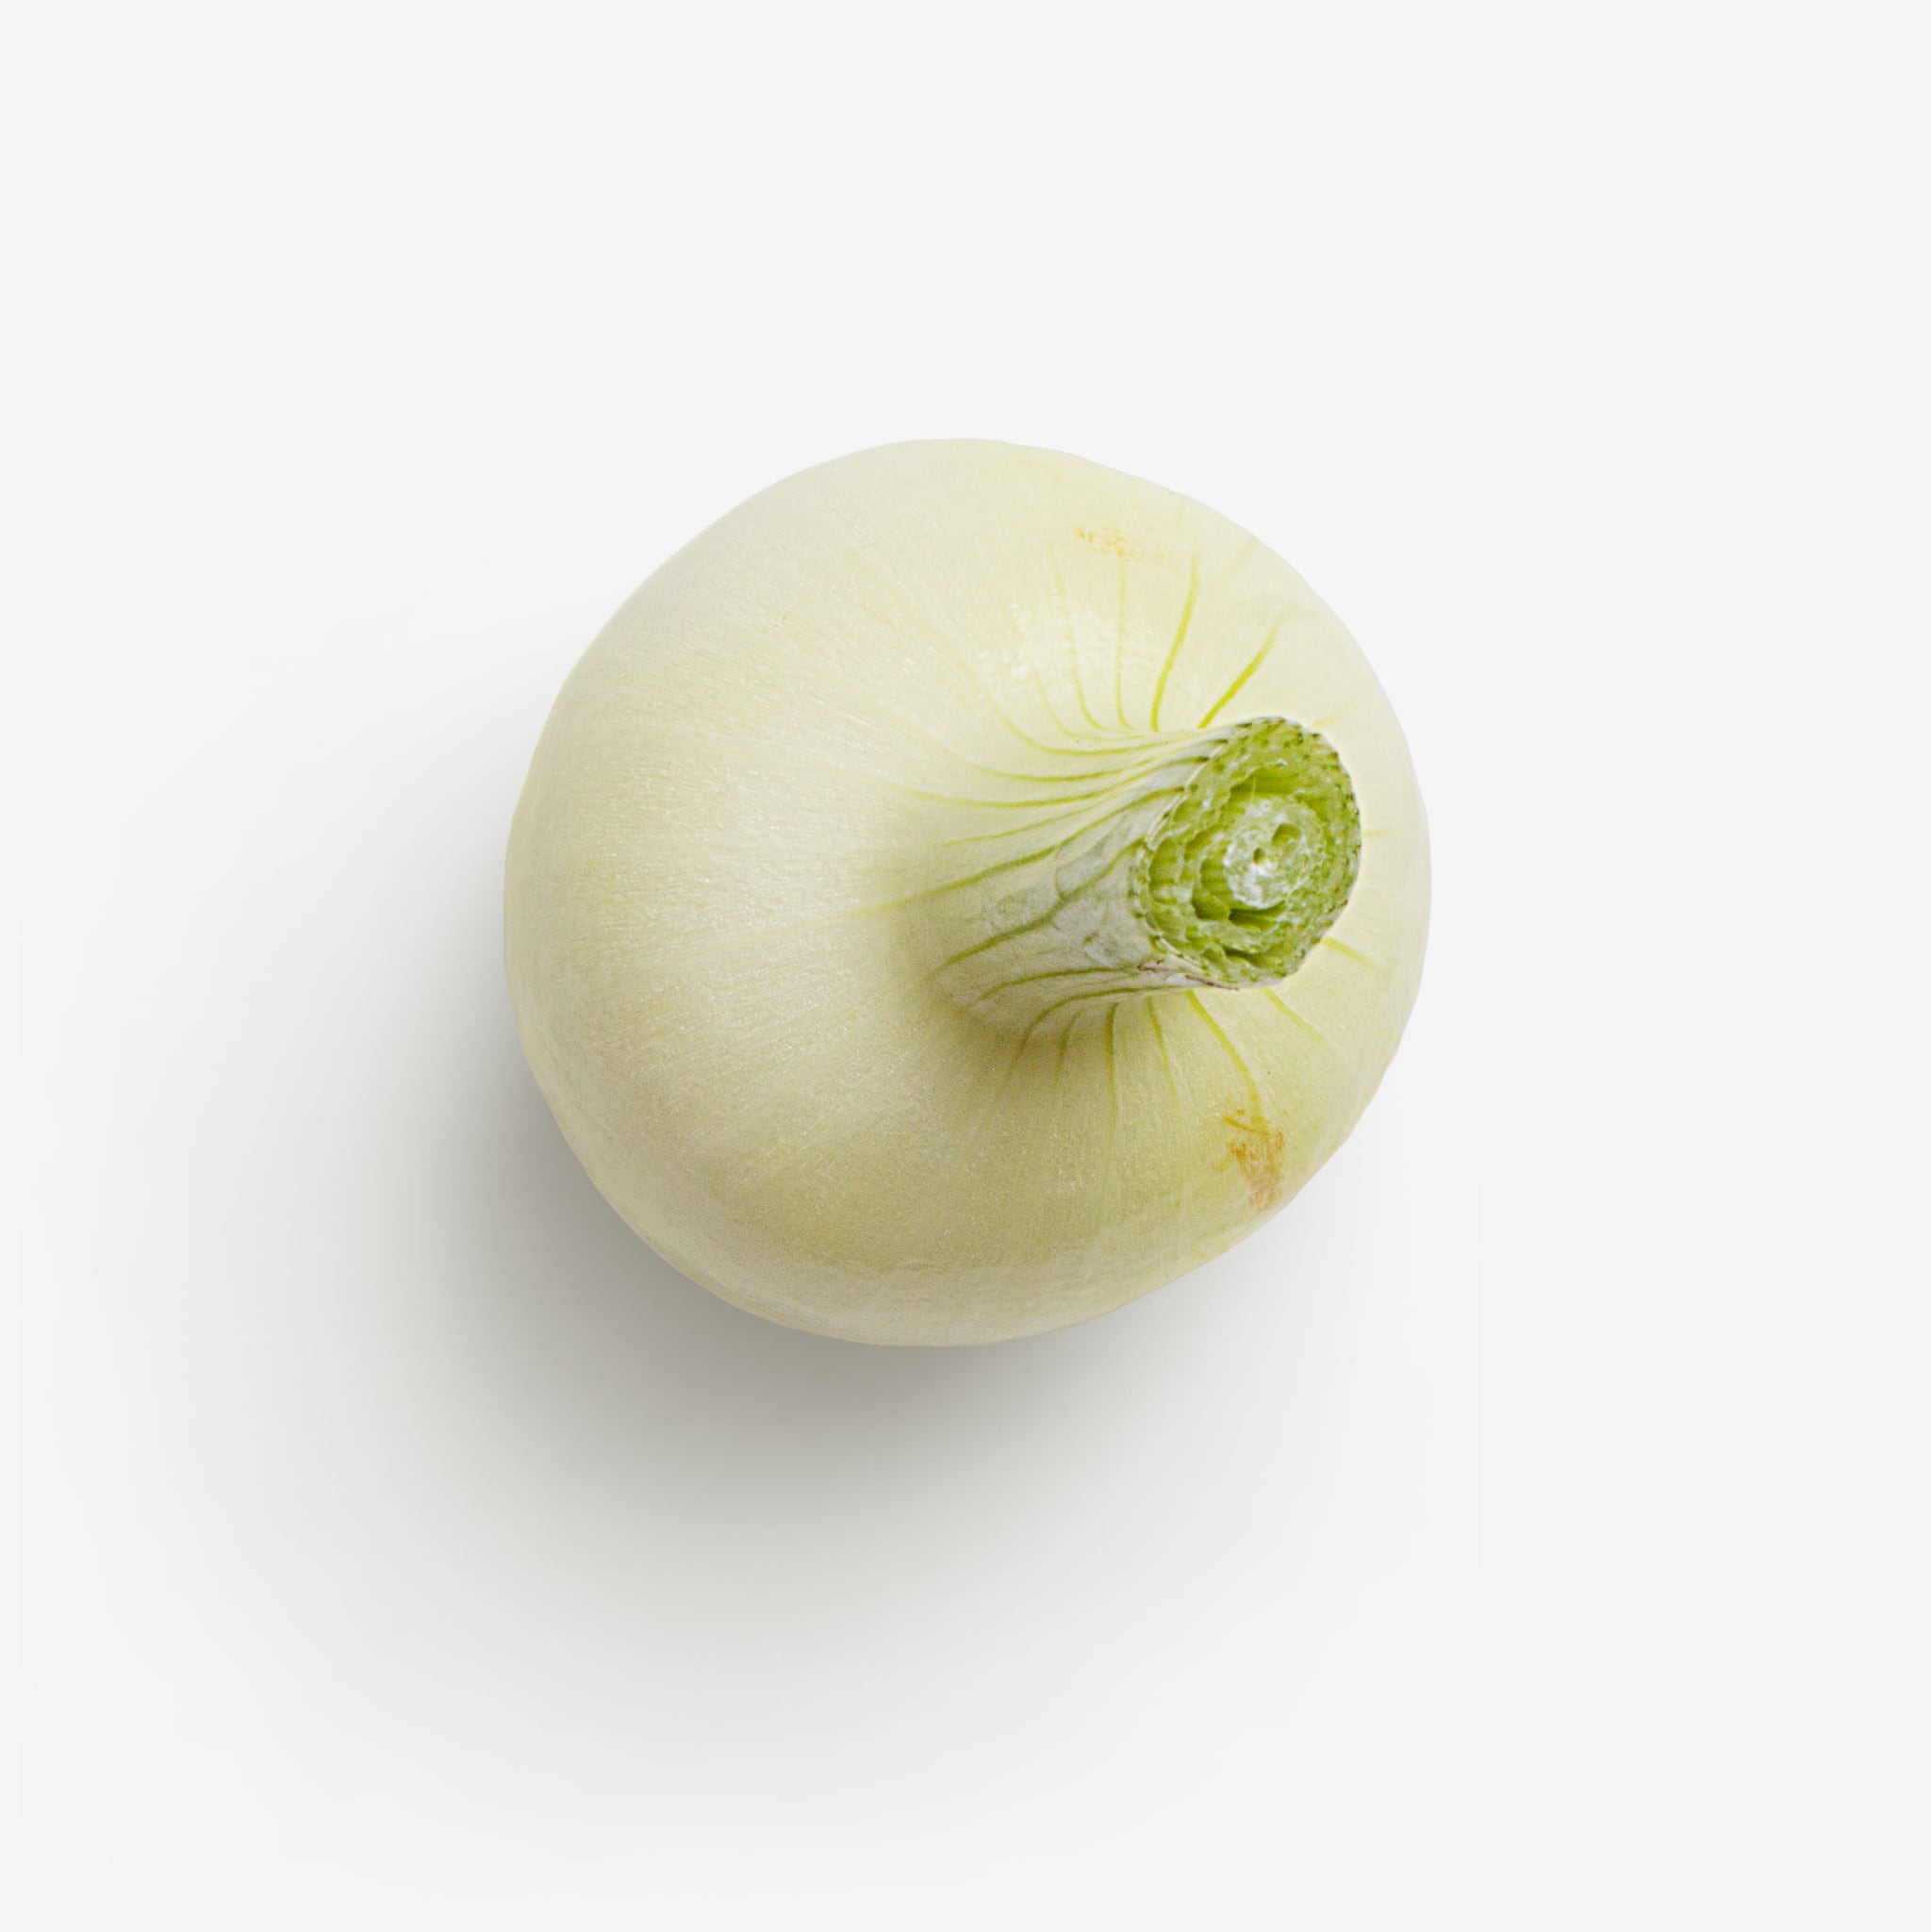 Onion PSD isolated image